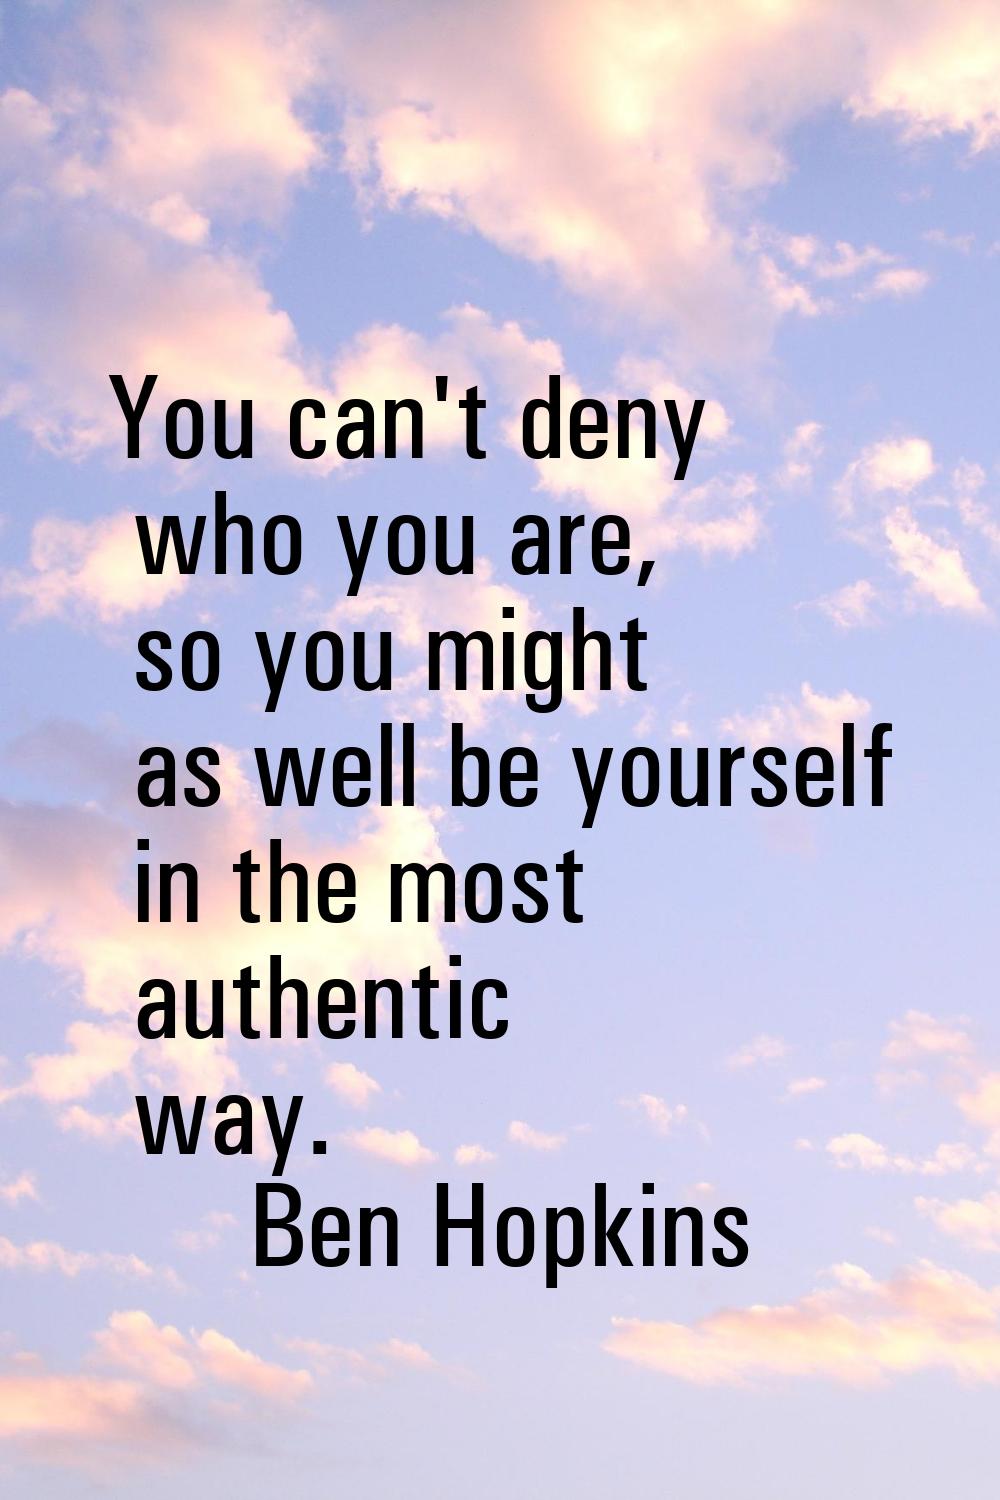 You can't deny who you are, so you might as well be yourself in the most authentic way.